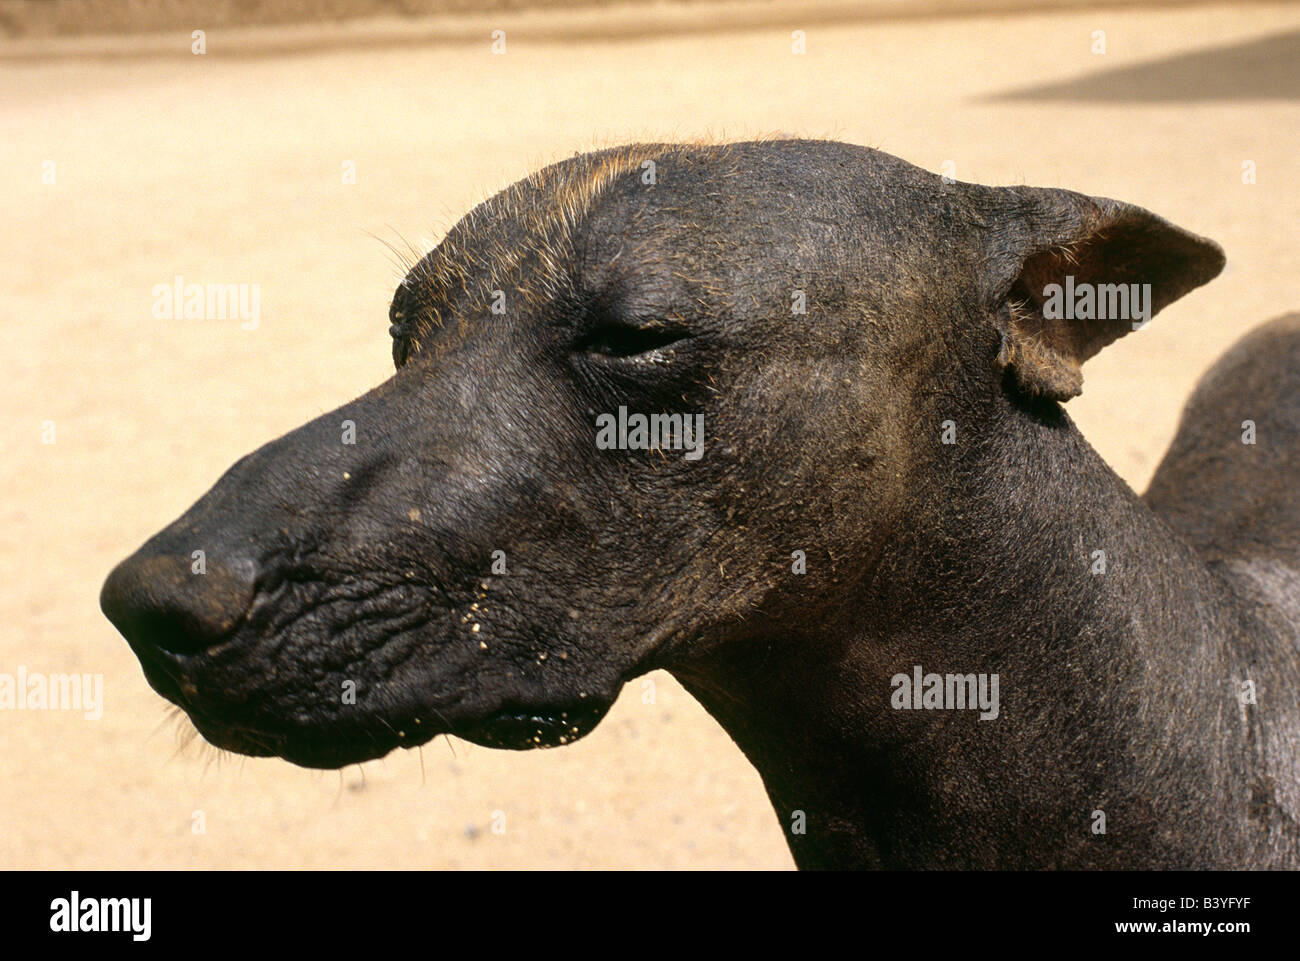 Peru, Trujillo, Chan Chan. A Peruvian hairless dog helps guard the Chimu site of Chan Chan in northern Peru. This breed is thought to have been around before the Incas and served as a lap dog (the breed is warm to the touch) and a source of meat for Peruvian nobility. Stock Photo